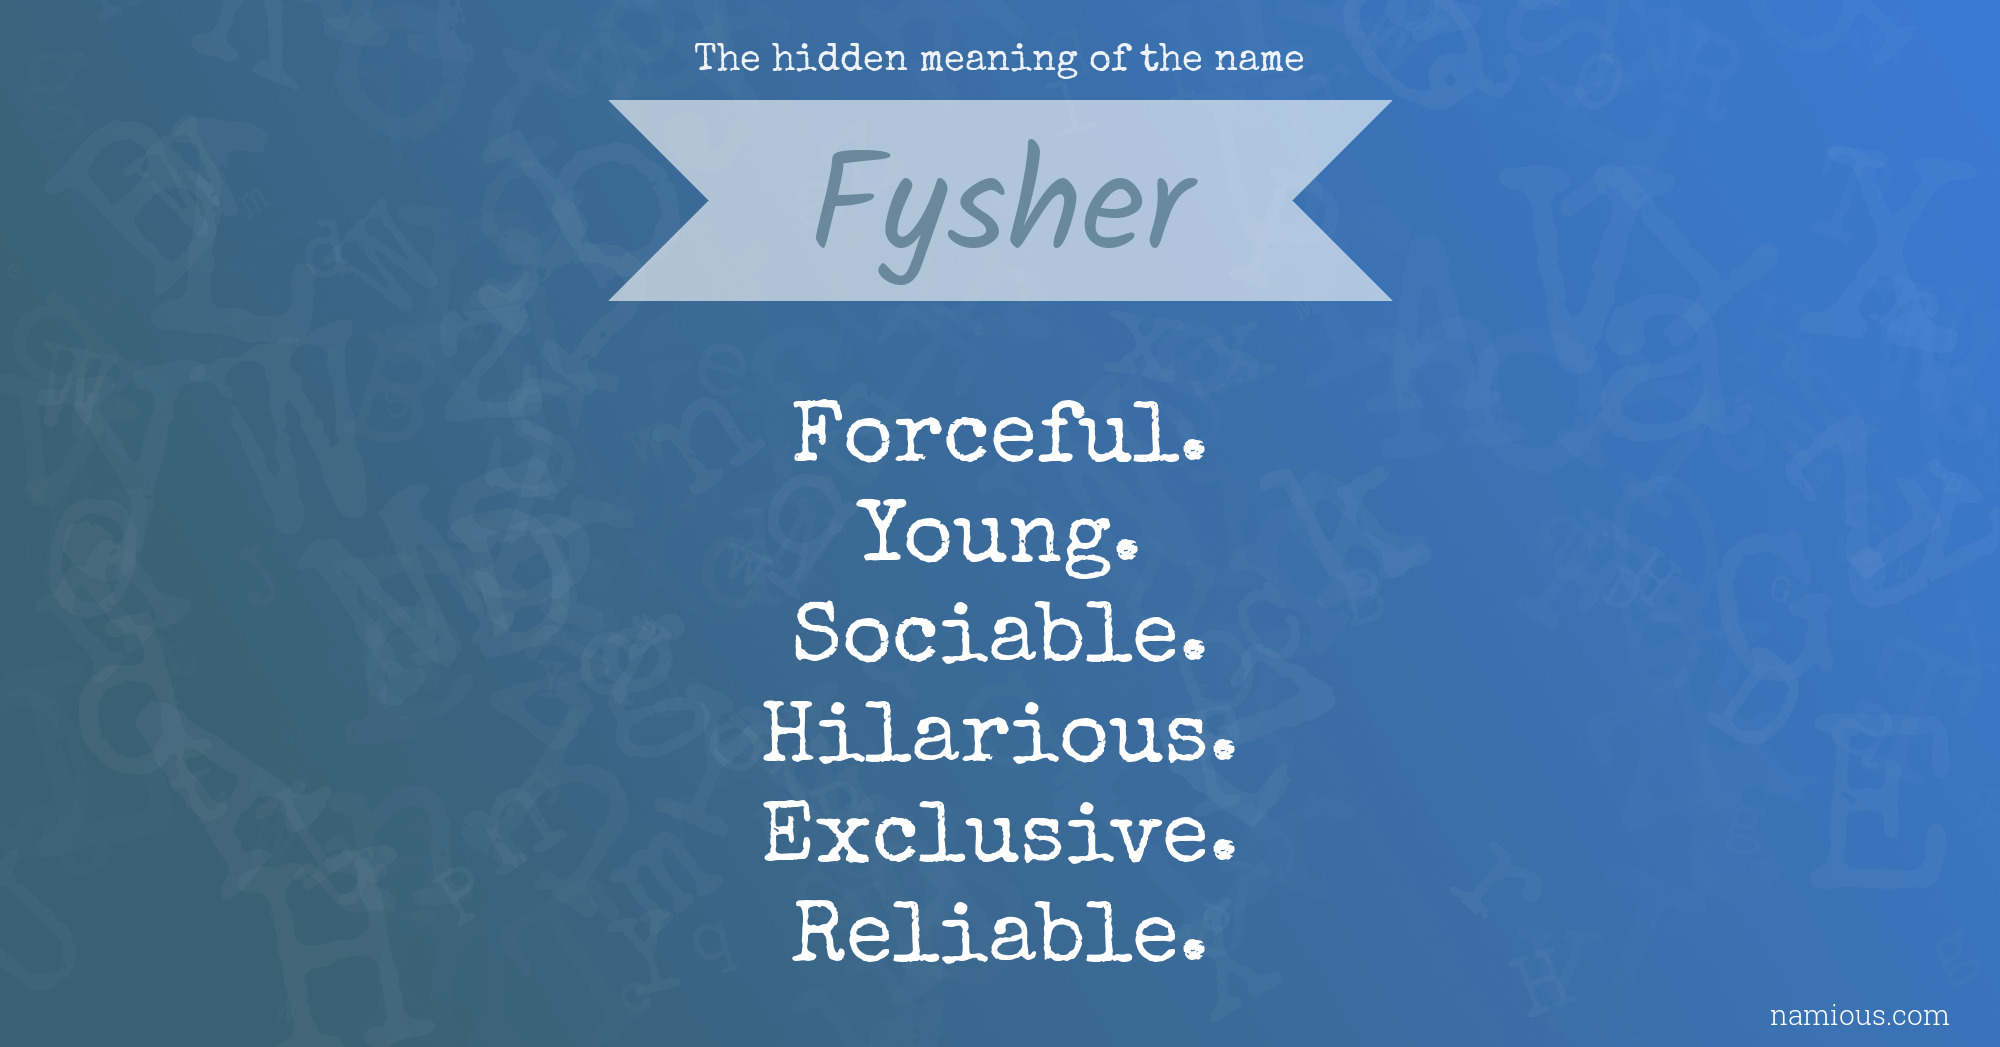 The hidden meaning of the name Fysher